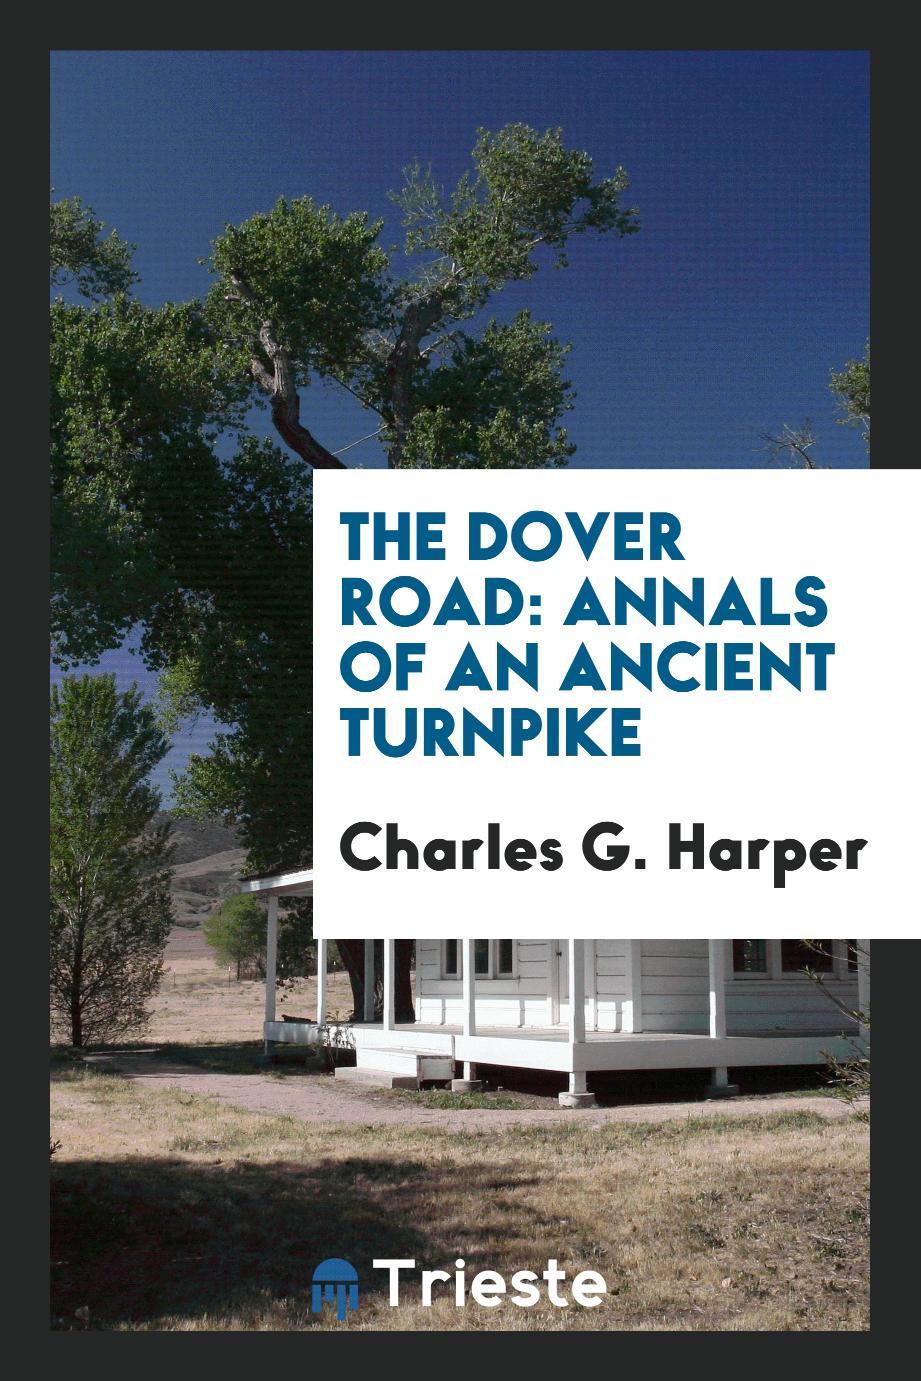 The Dover road: annals of an ancient turnpike